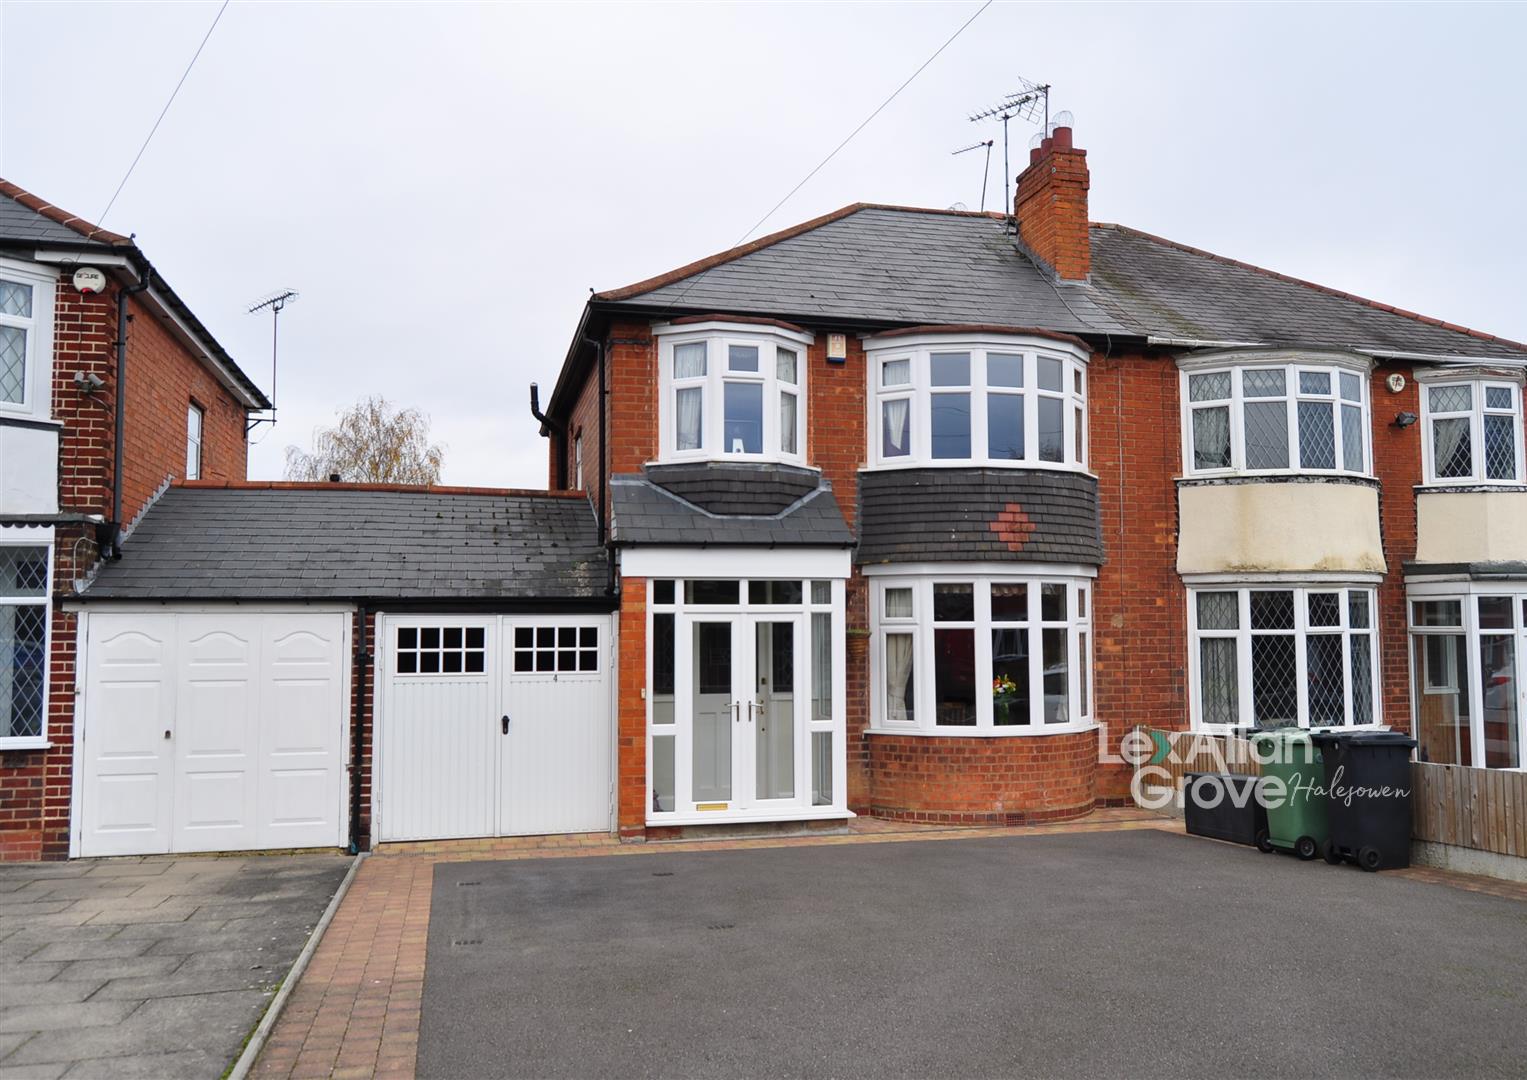 3 bed semi-detached house for sale in Cavendish Road, Halesowen, B62 